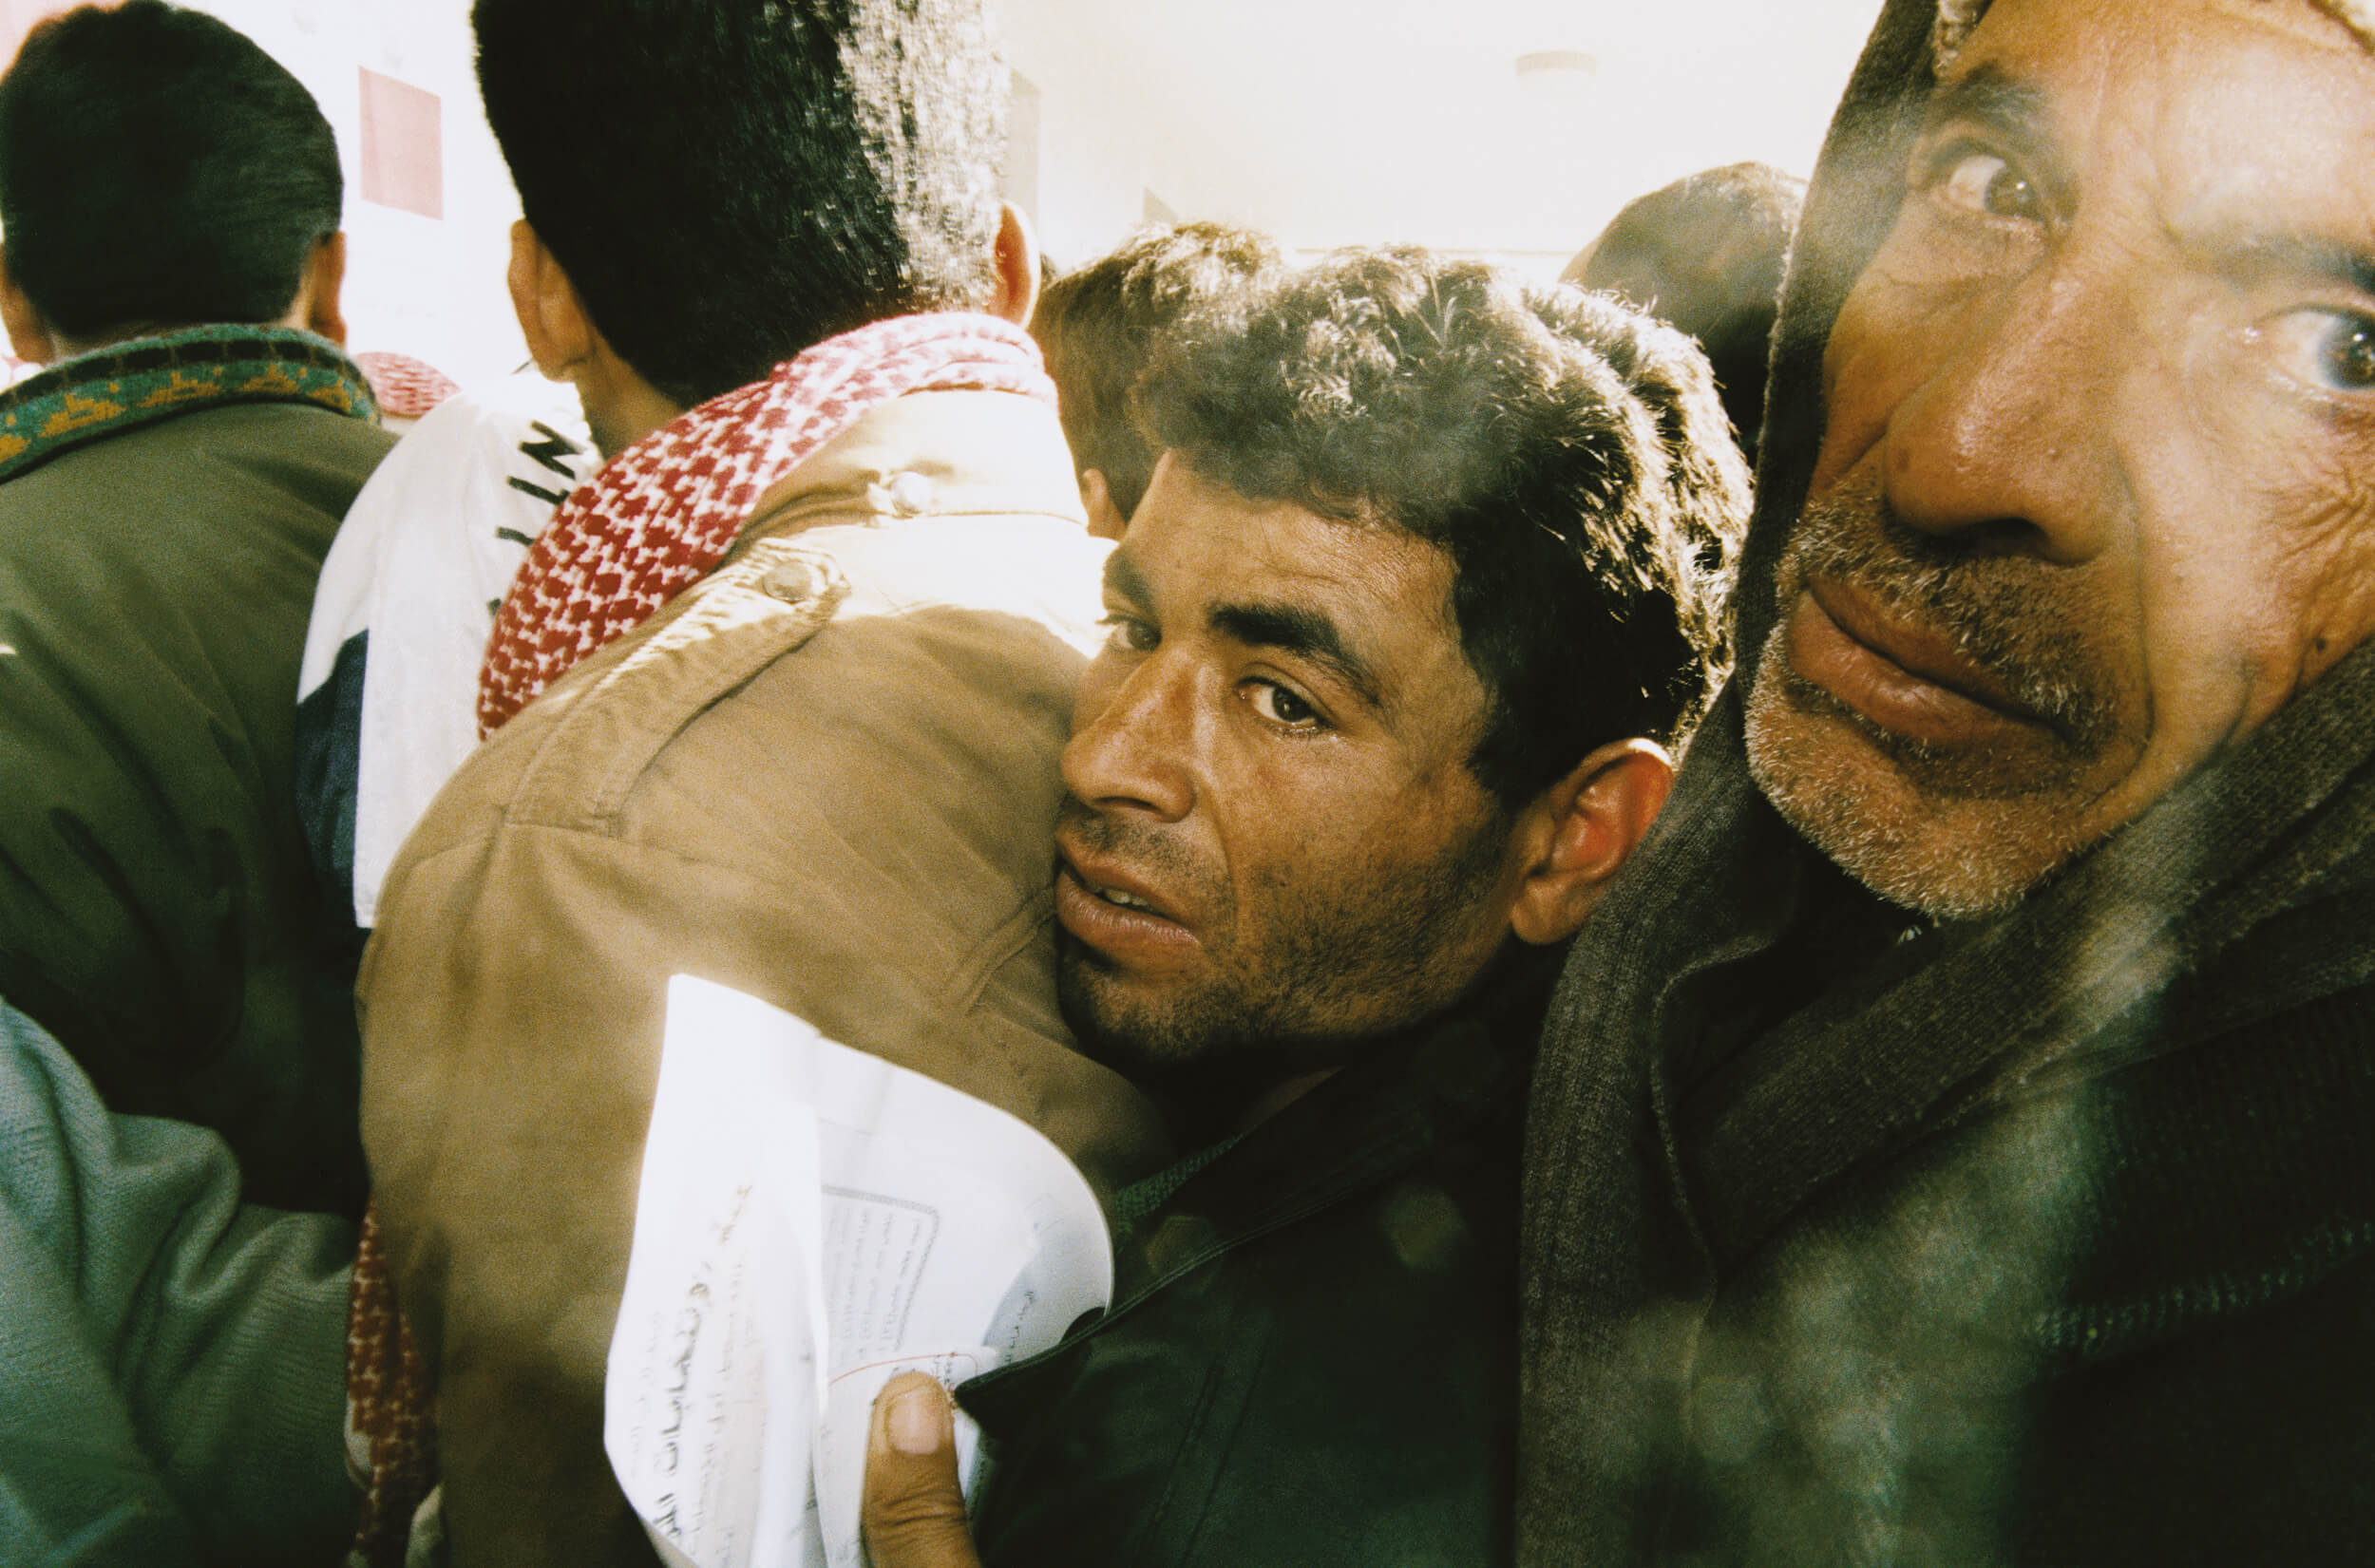  Gaza January 1996. Palestinians vote in the first Palestinian elections ever. 